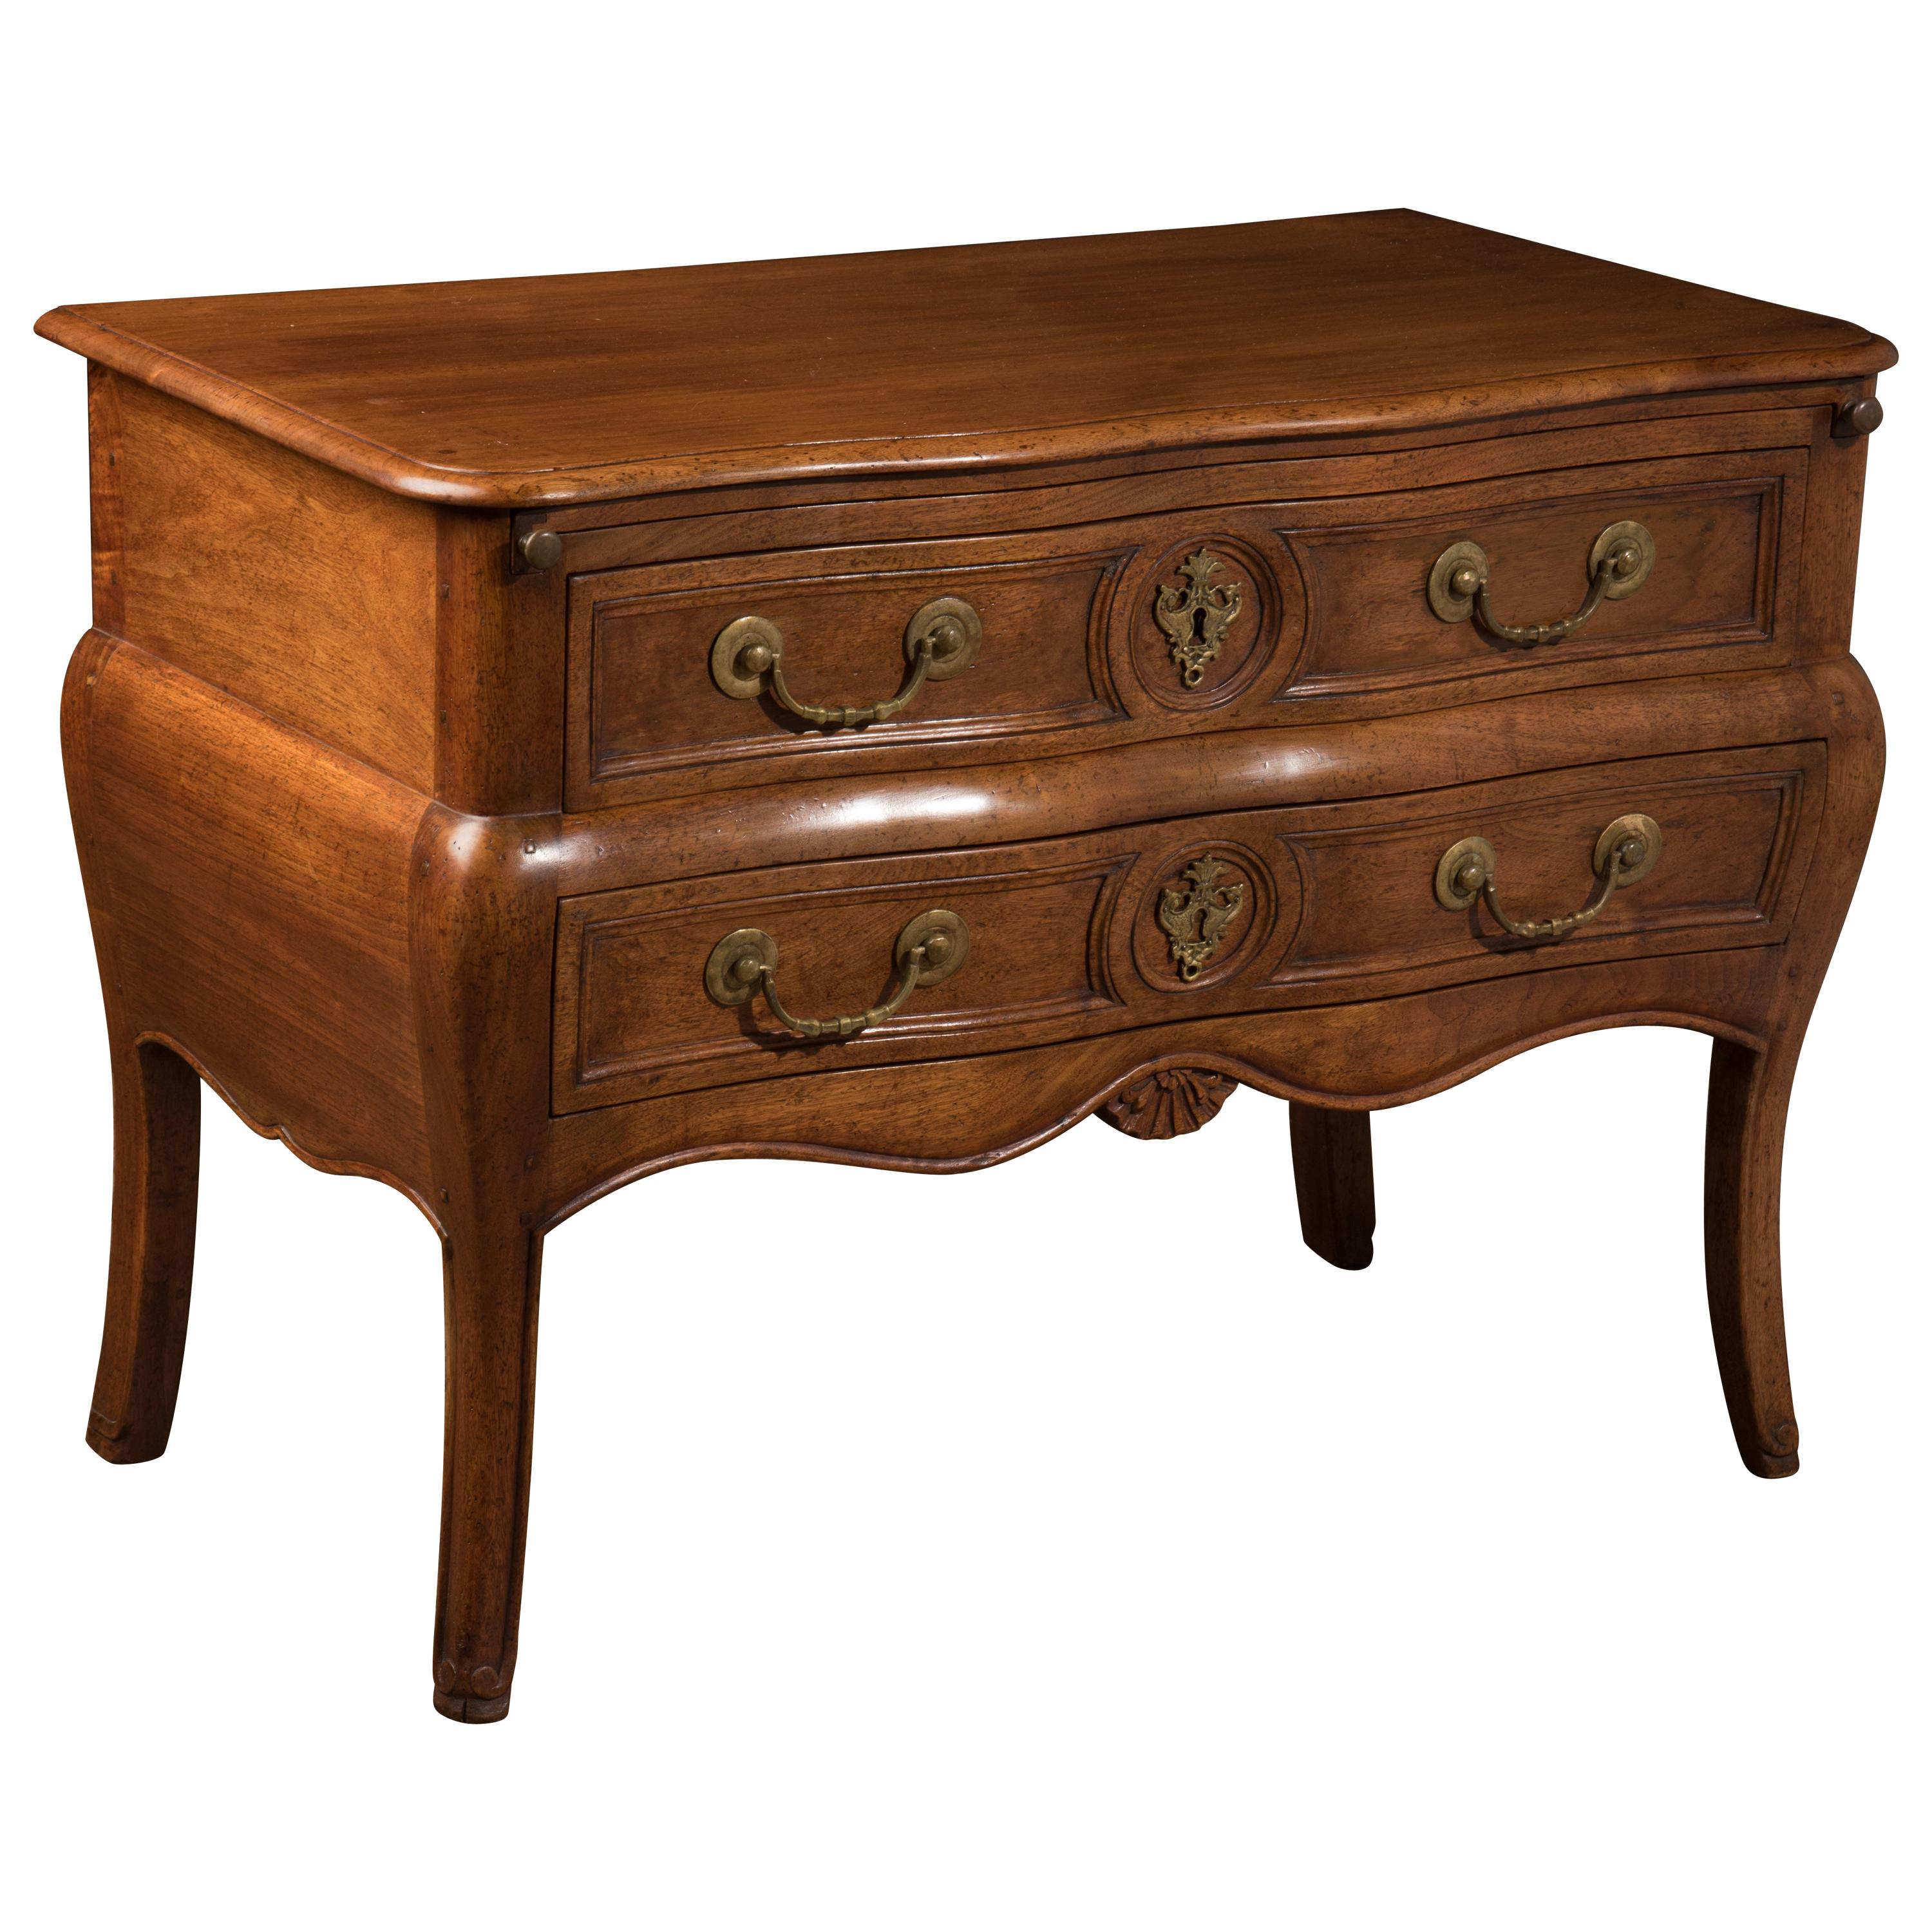 Handcrafted Cabinetmaker's French Provincial Commode Chest of Drawers